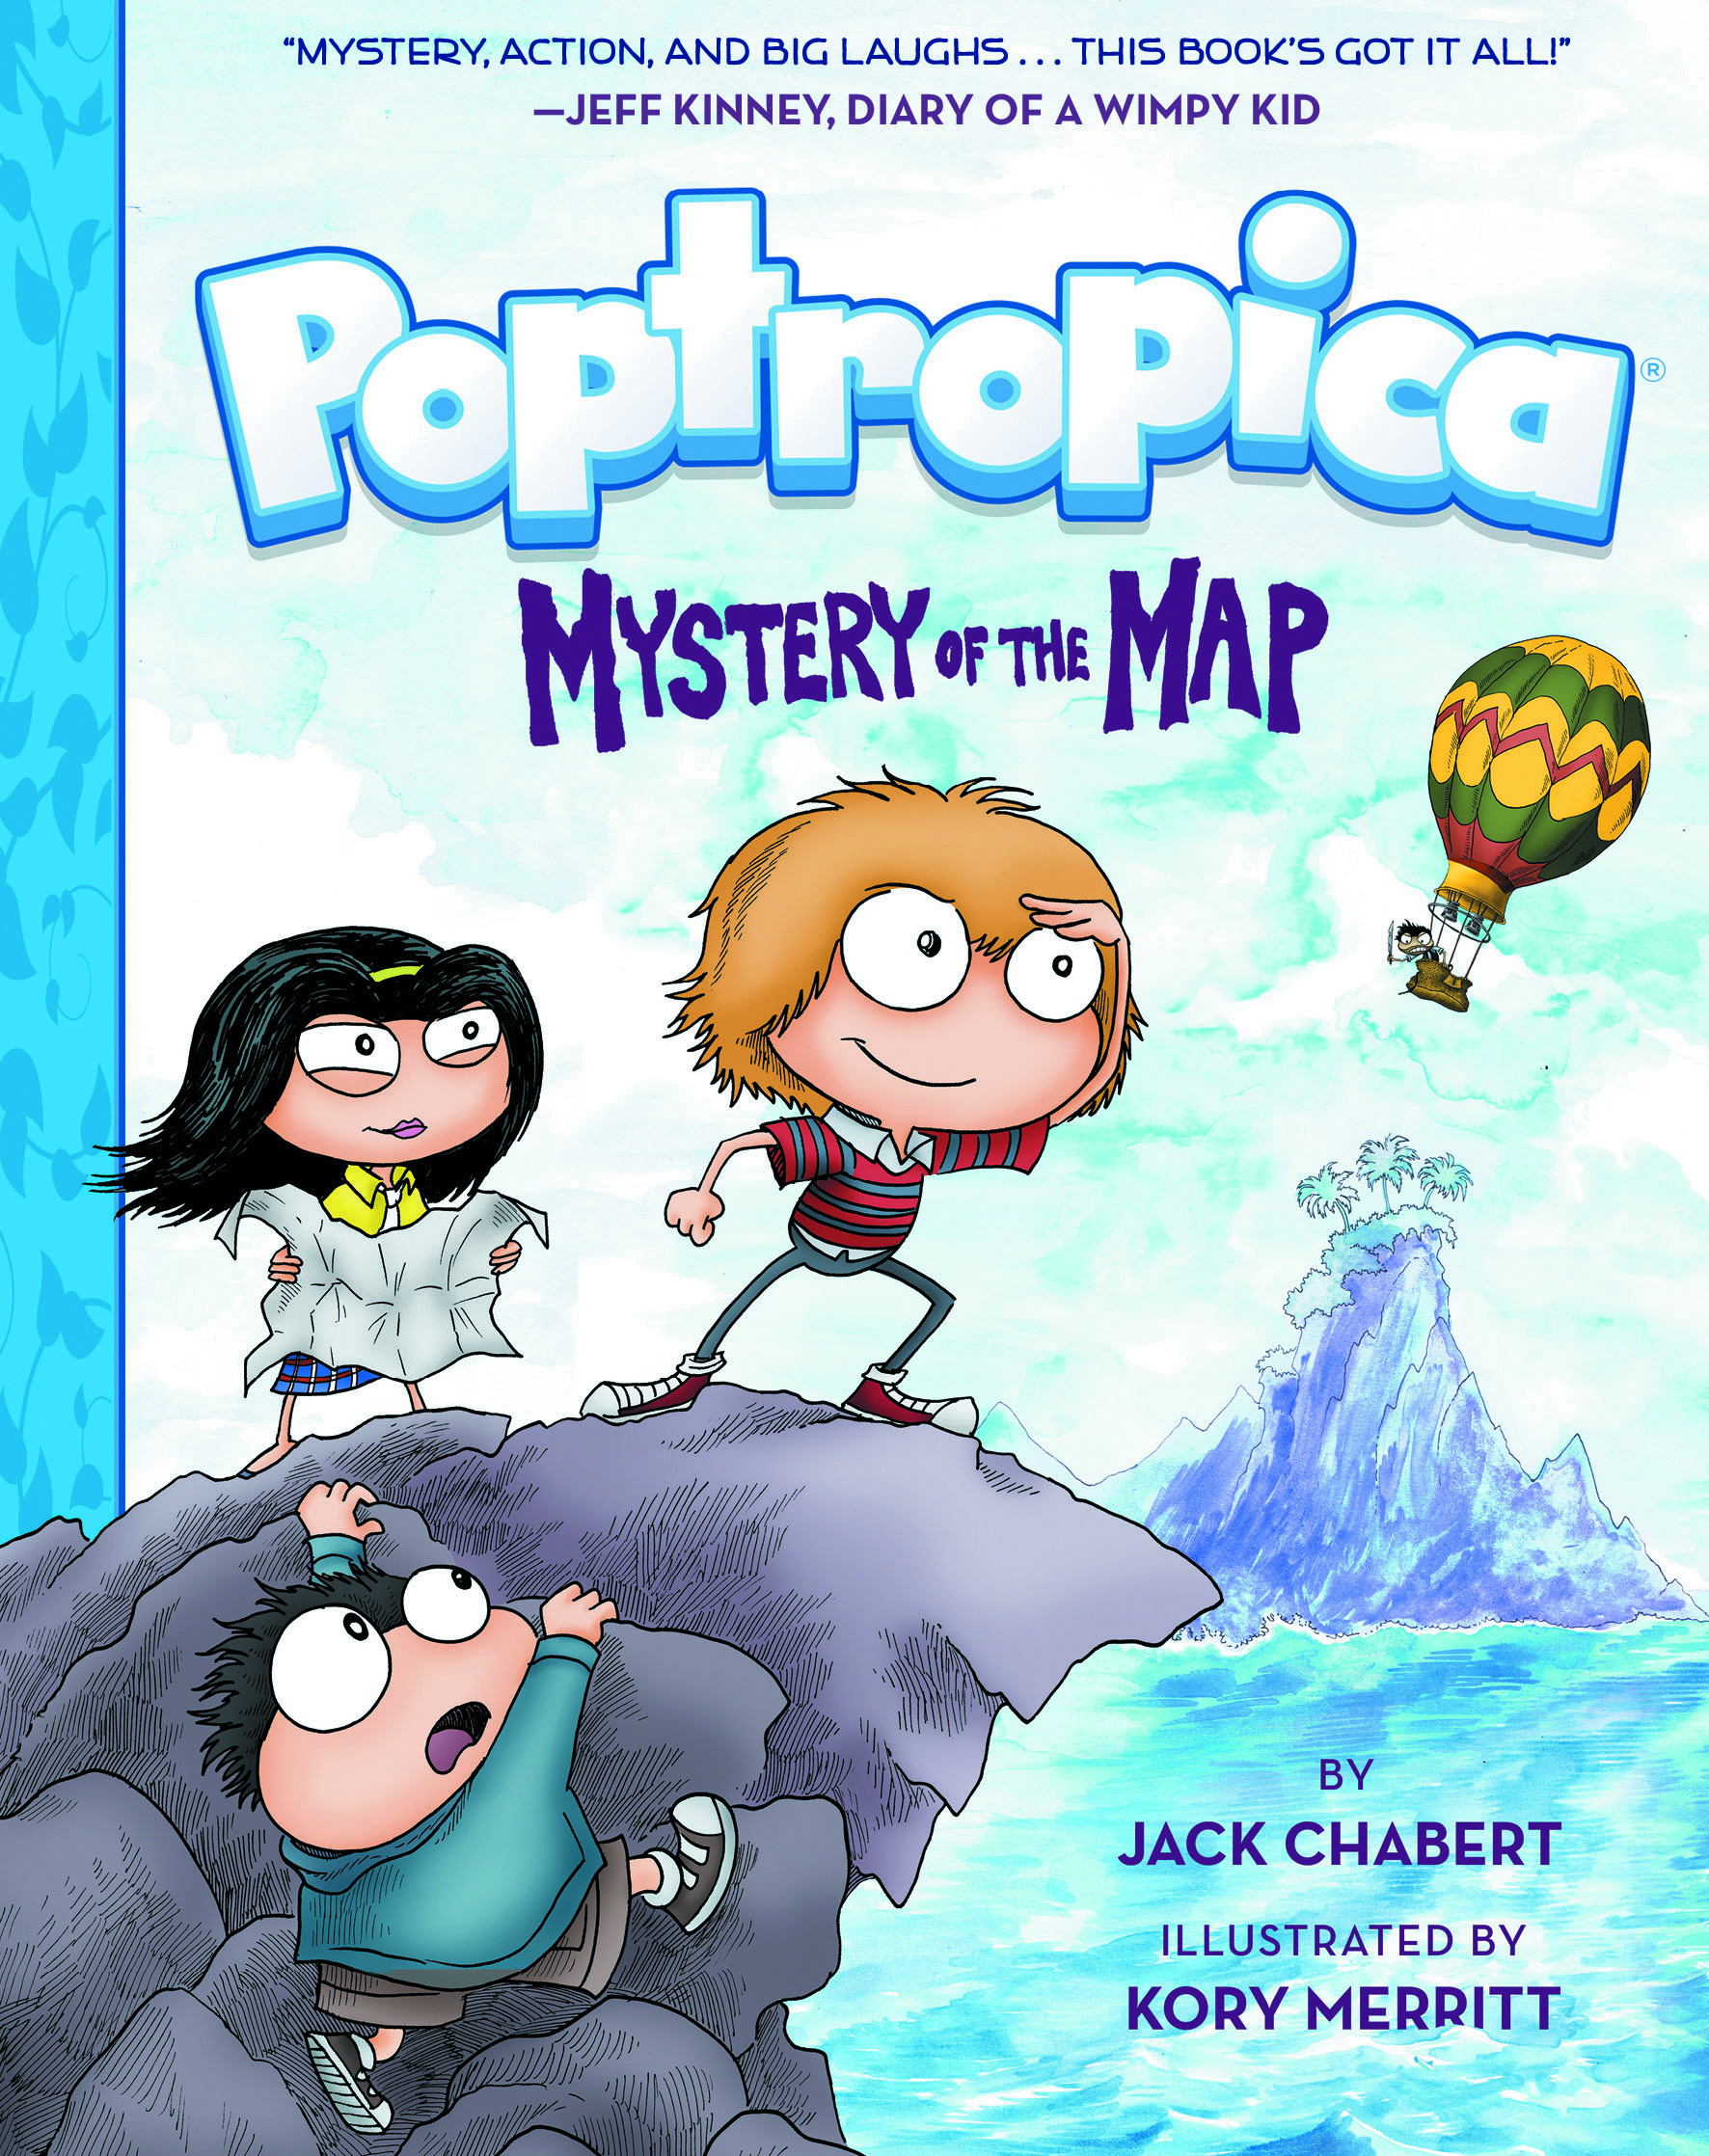 POPTROPICA BOOK 01 MYSTERY OF THE MAP